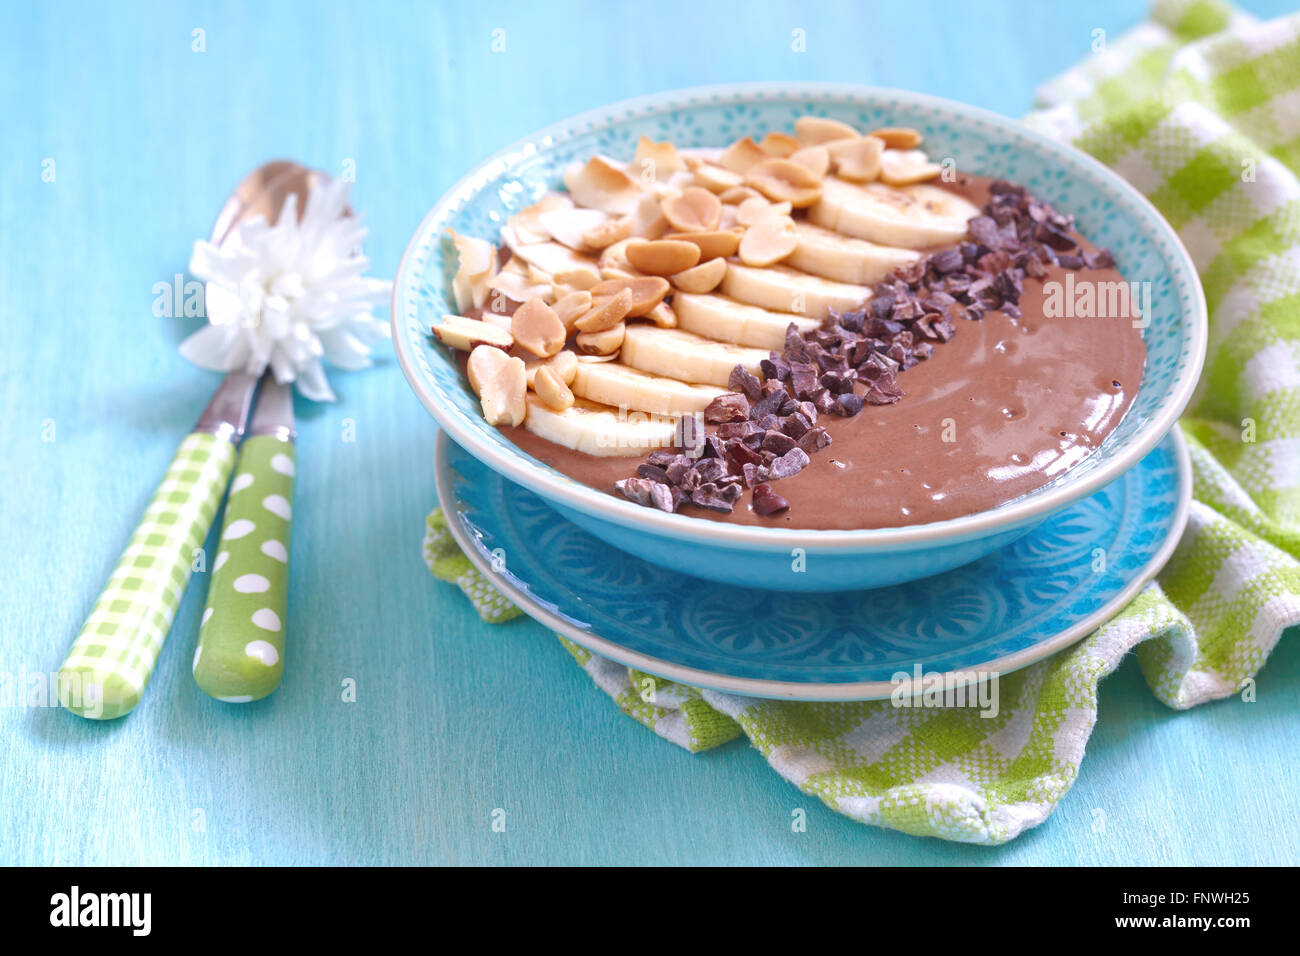 Peanut Butter chocolate smoothie Banque D'Images